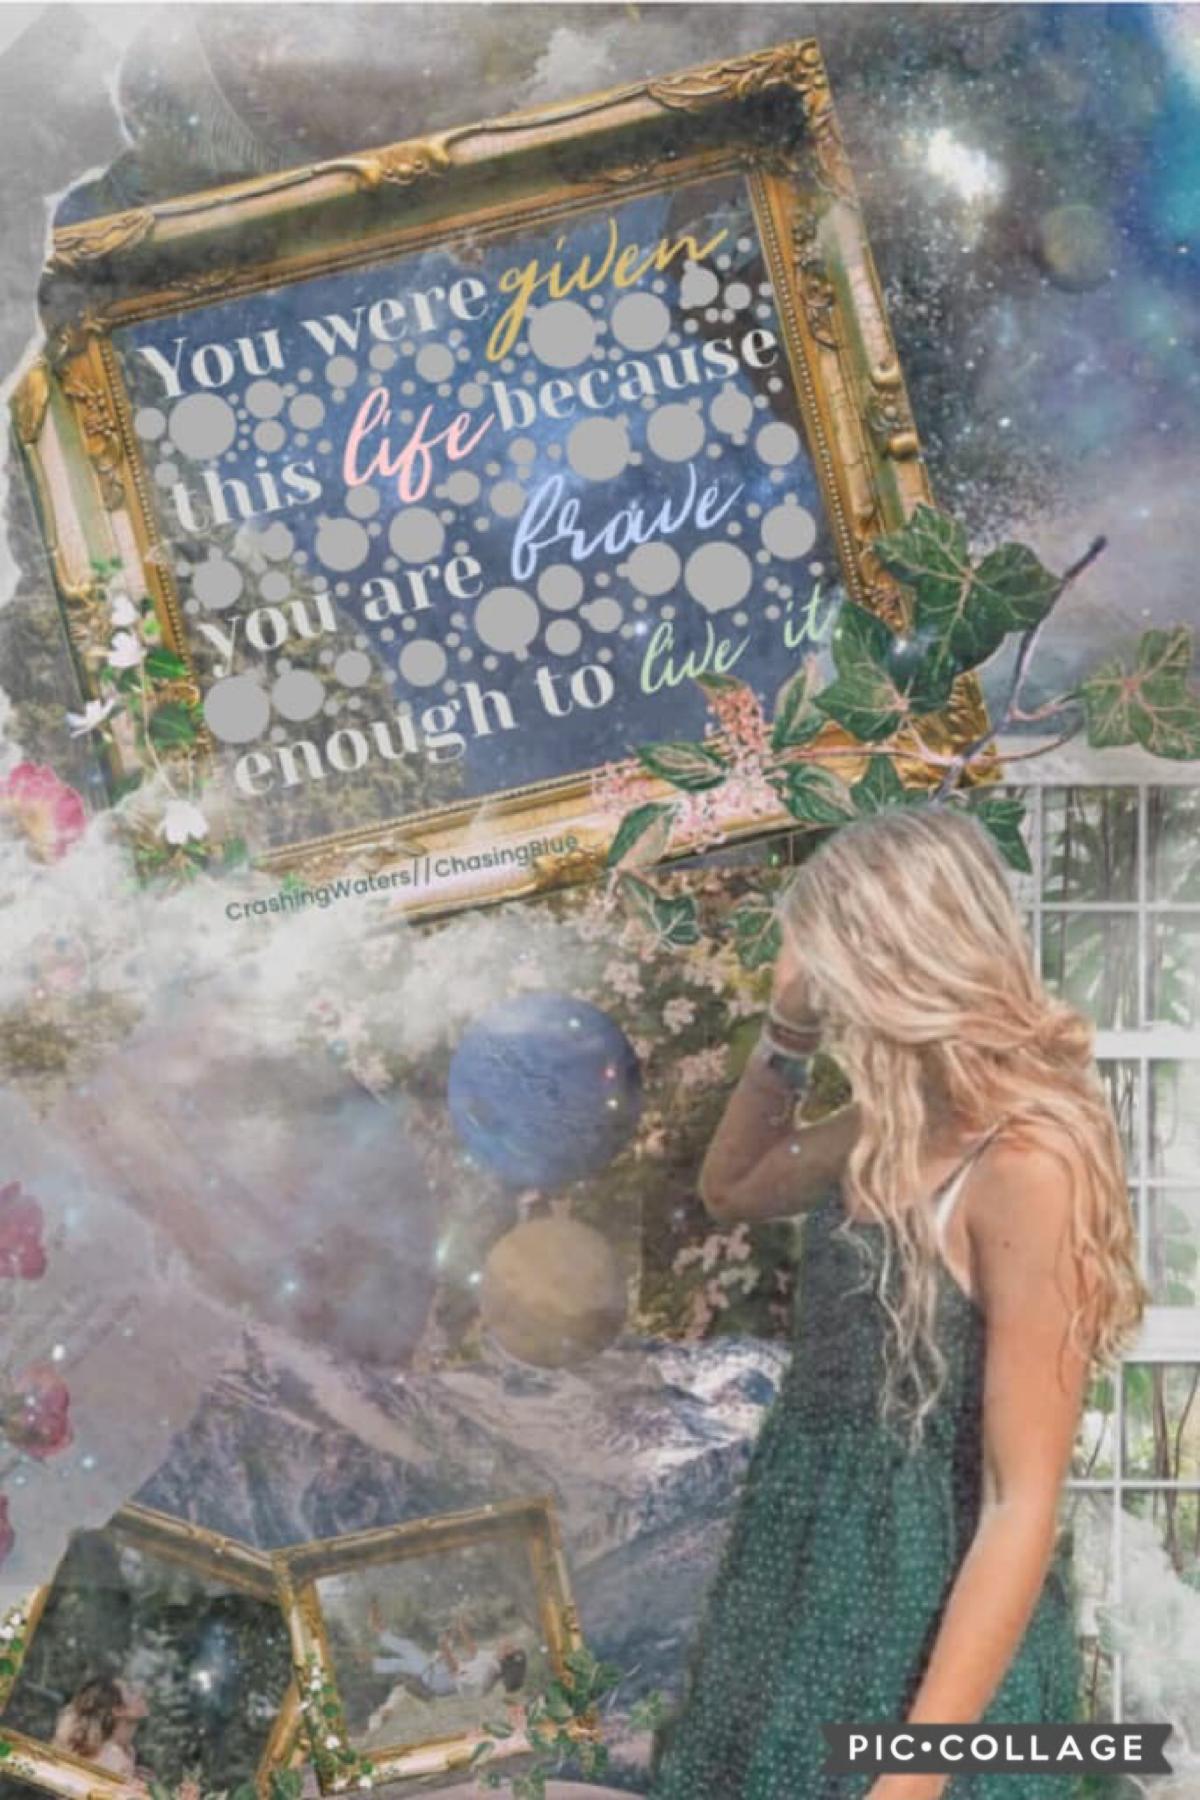 Collab with the amazing chasingblue! She did the stunning text and I did the background, I loved doing this collab so much! ❤️I’m so glad to be back on pic collage, I missed it so much. How are you all? 💗